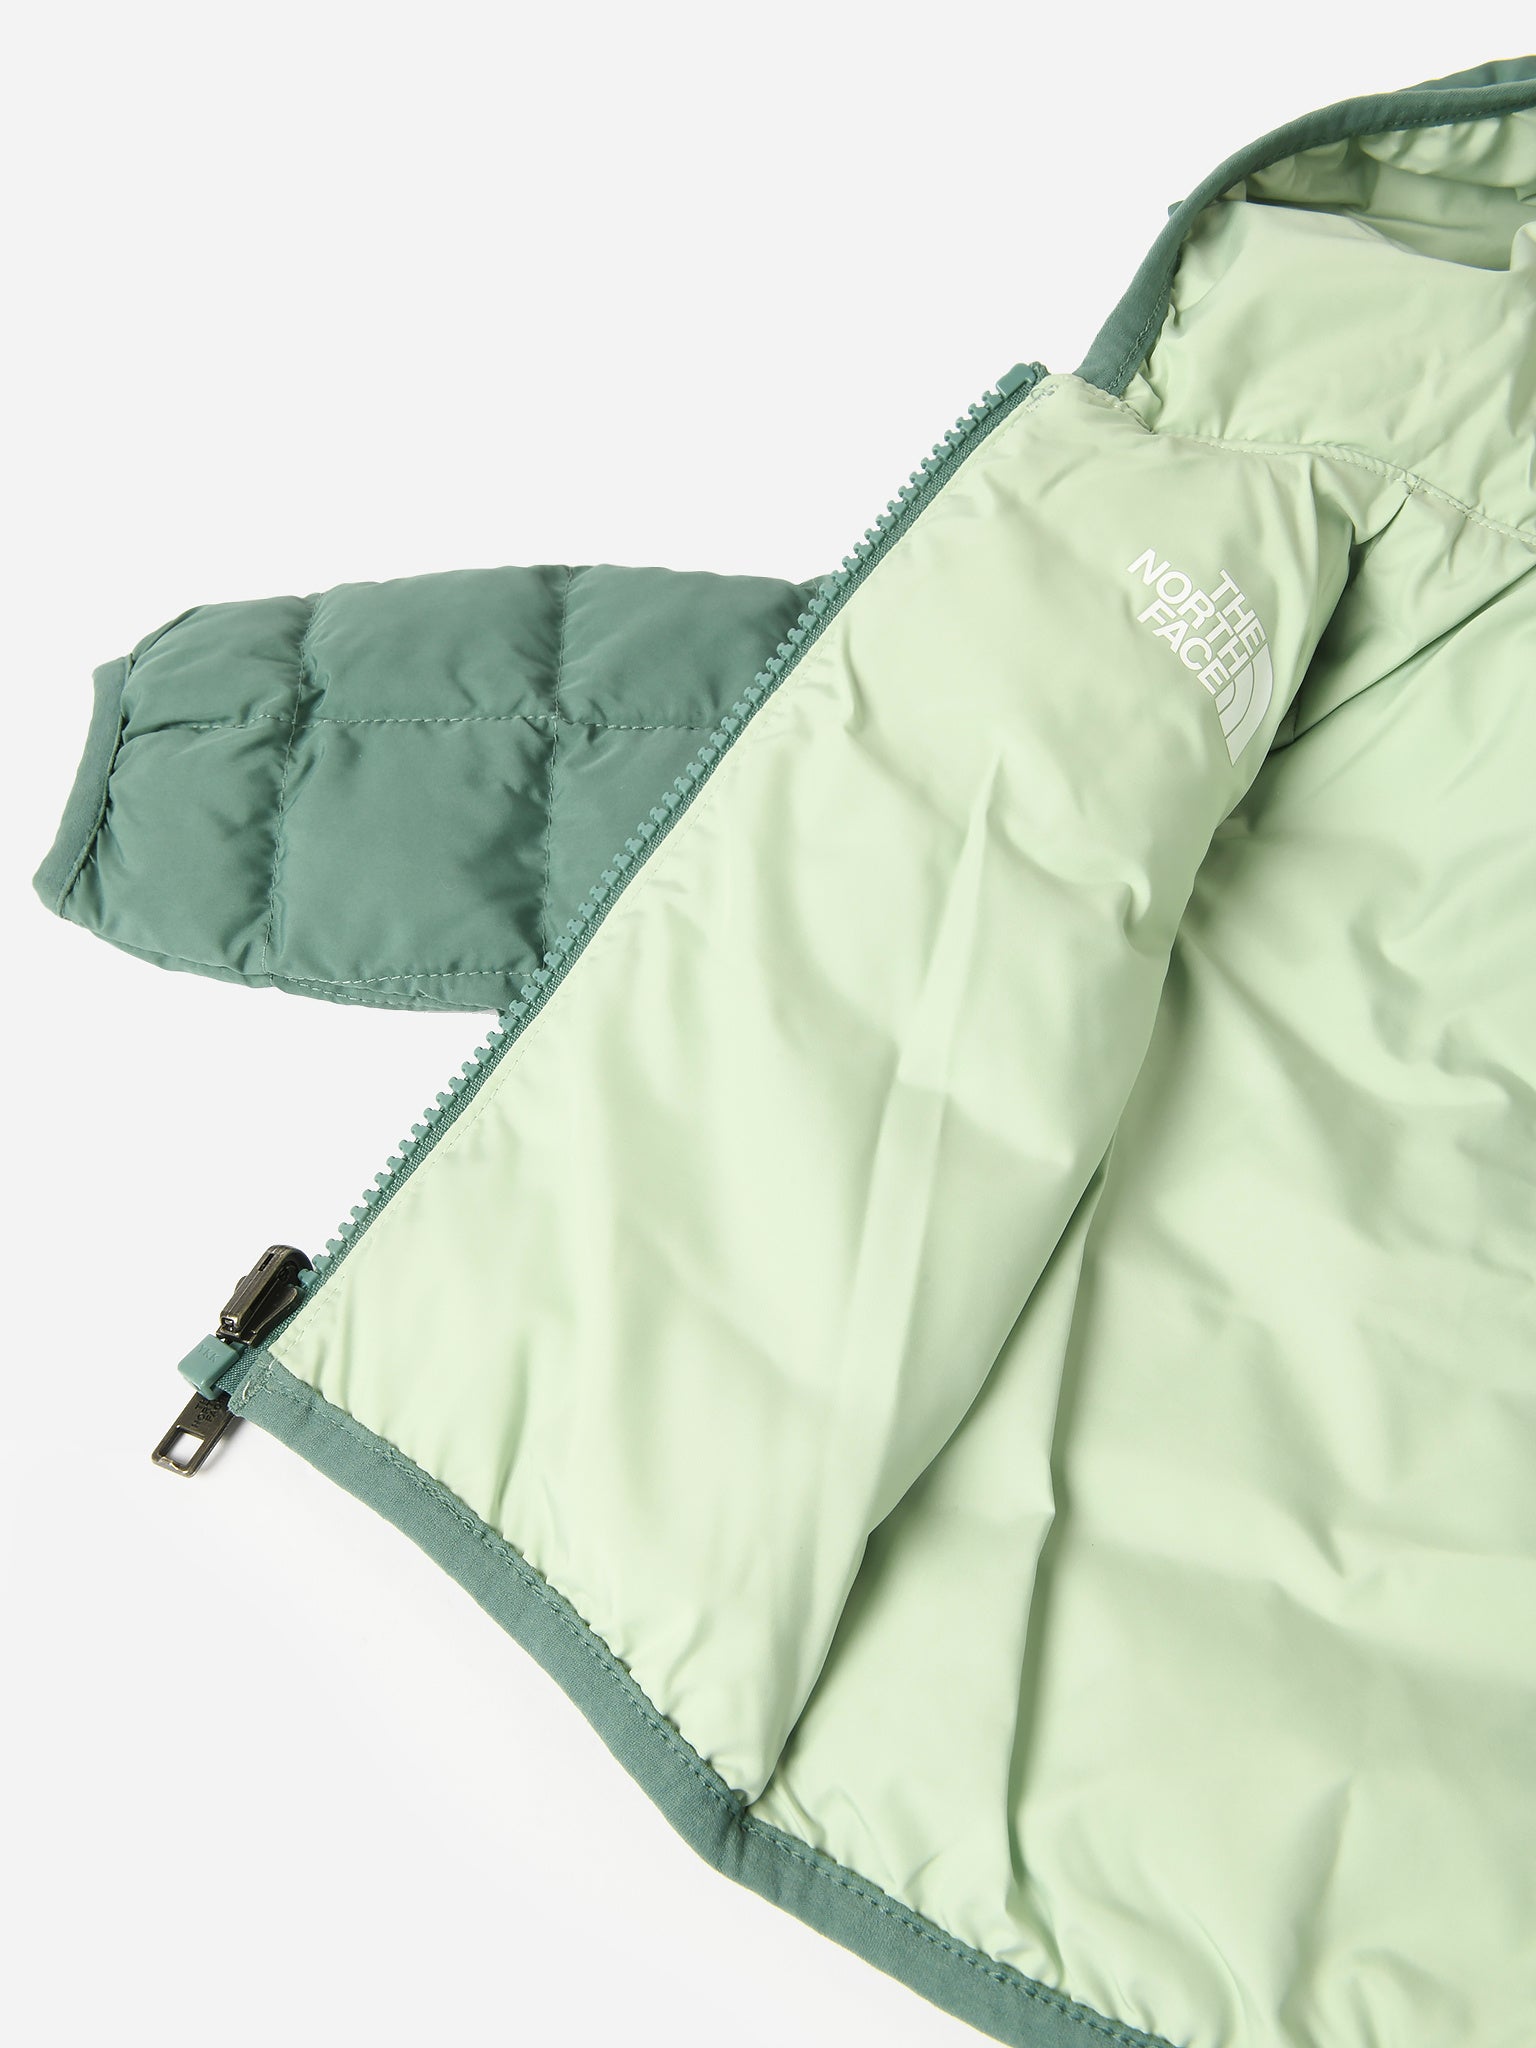 The North Face Baby North Down Hooded Jacket